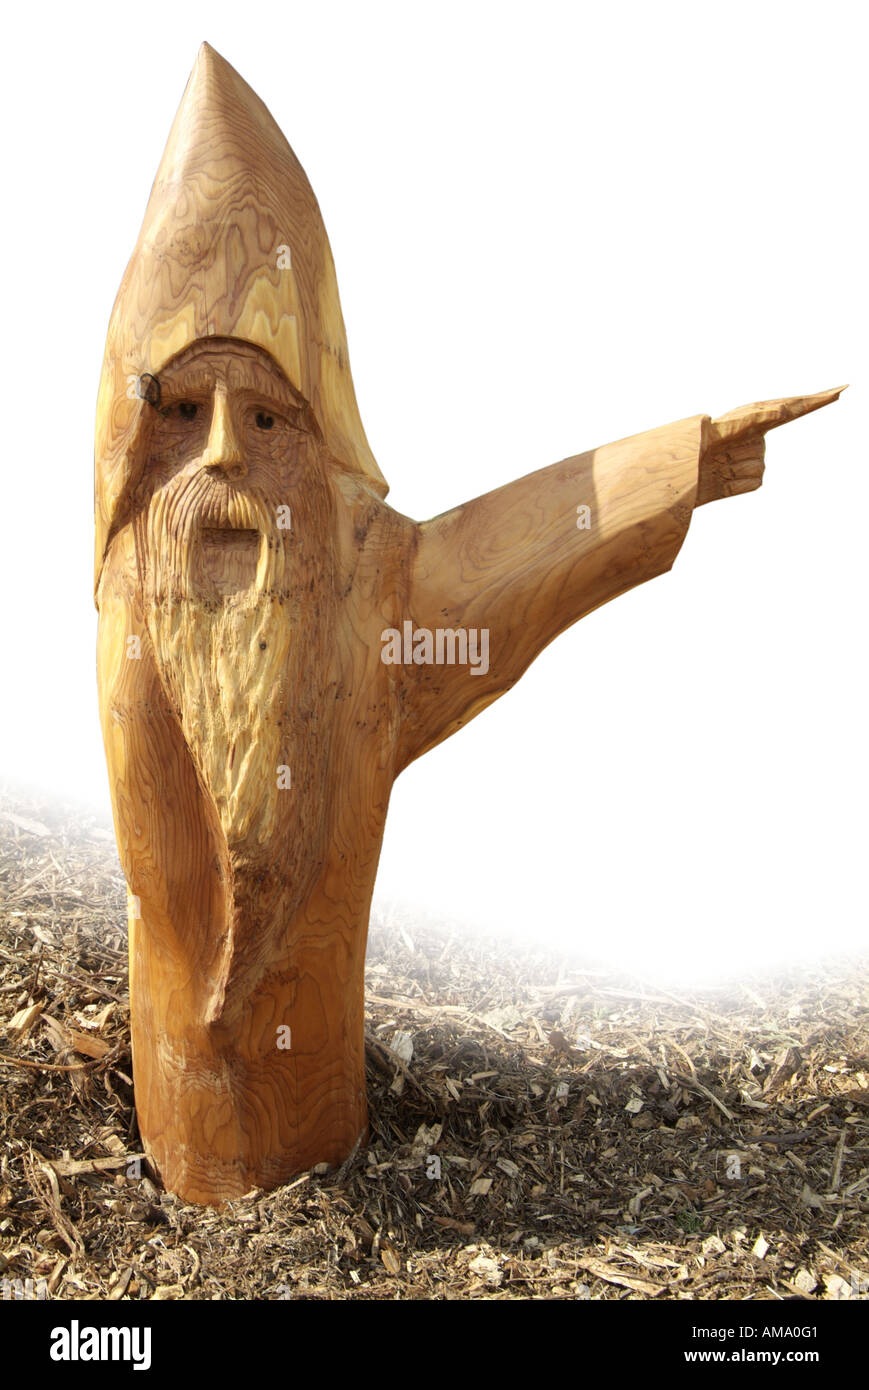 Gnome wood carve chain saw beard ornament sculpture spirit timber spirit mischief folklore magic pagan elf point direction lead Stock Photo